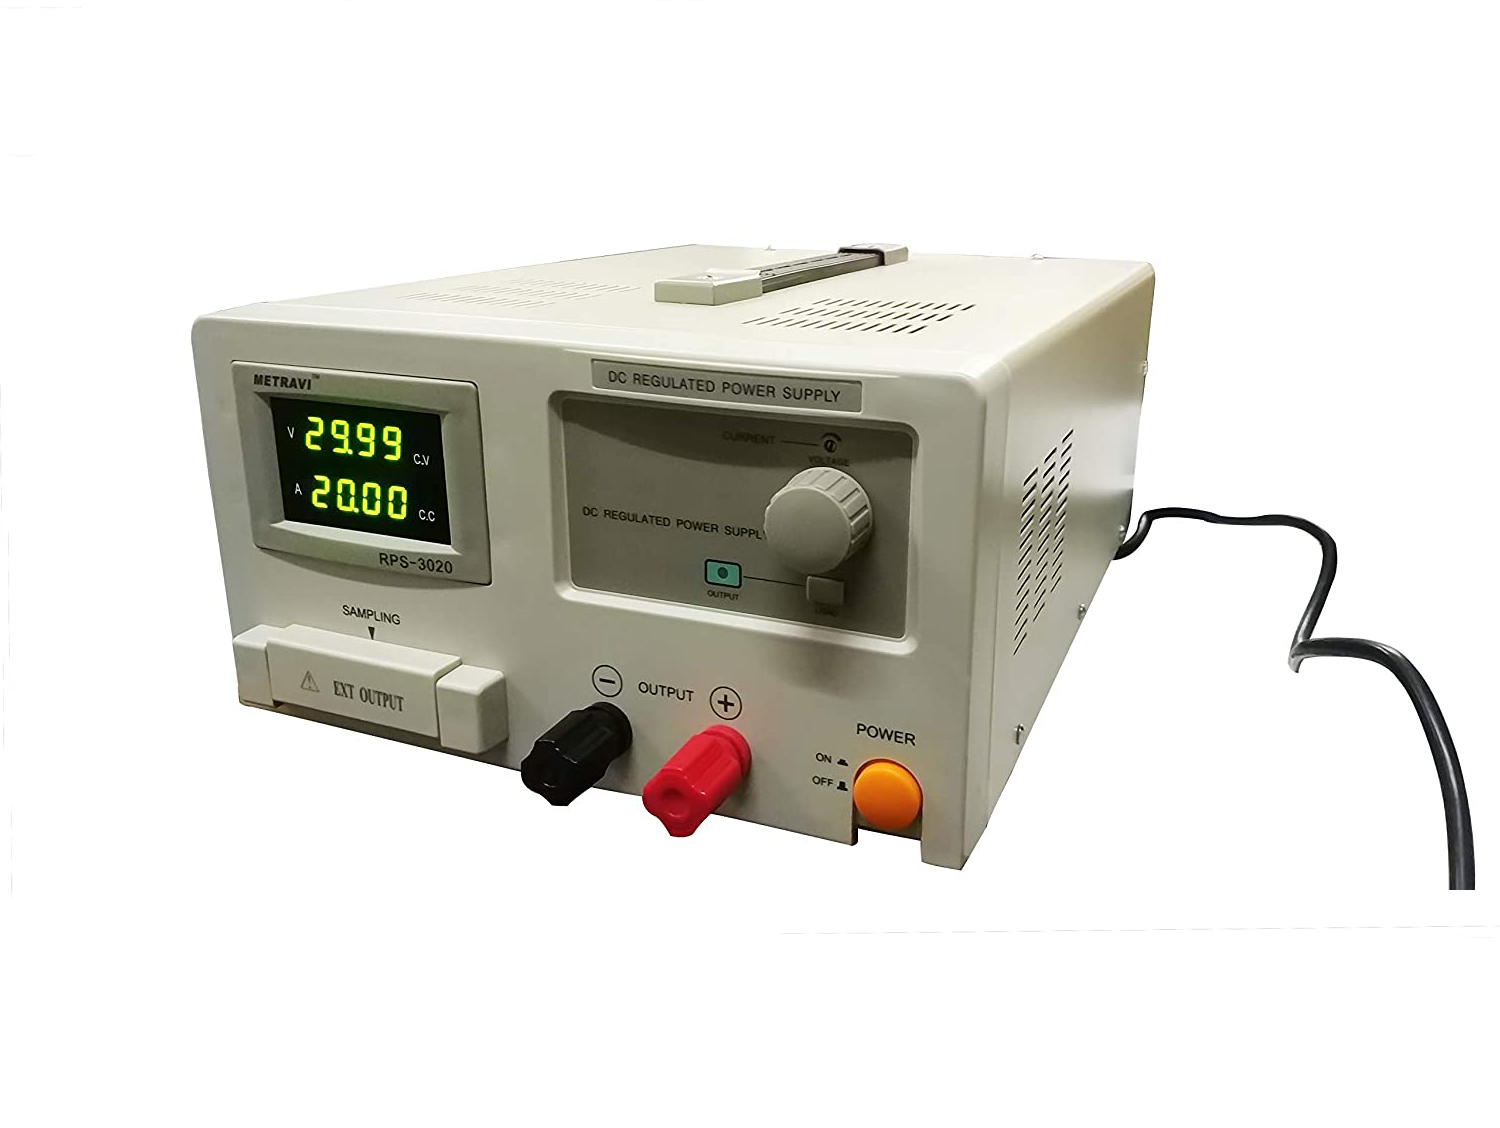 Metravi RPS-3020 DC Regulated Power Supply - Single Output with LED Display of Variable 0-30V / 0-20A DC